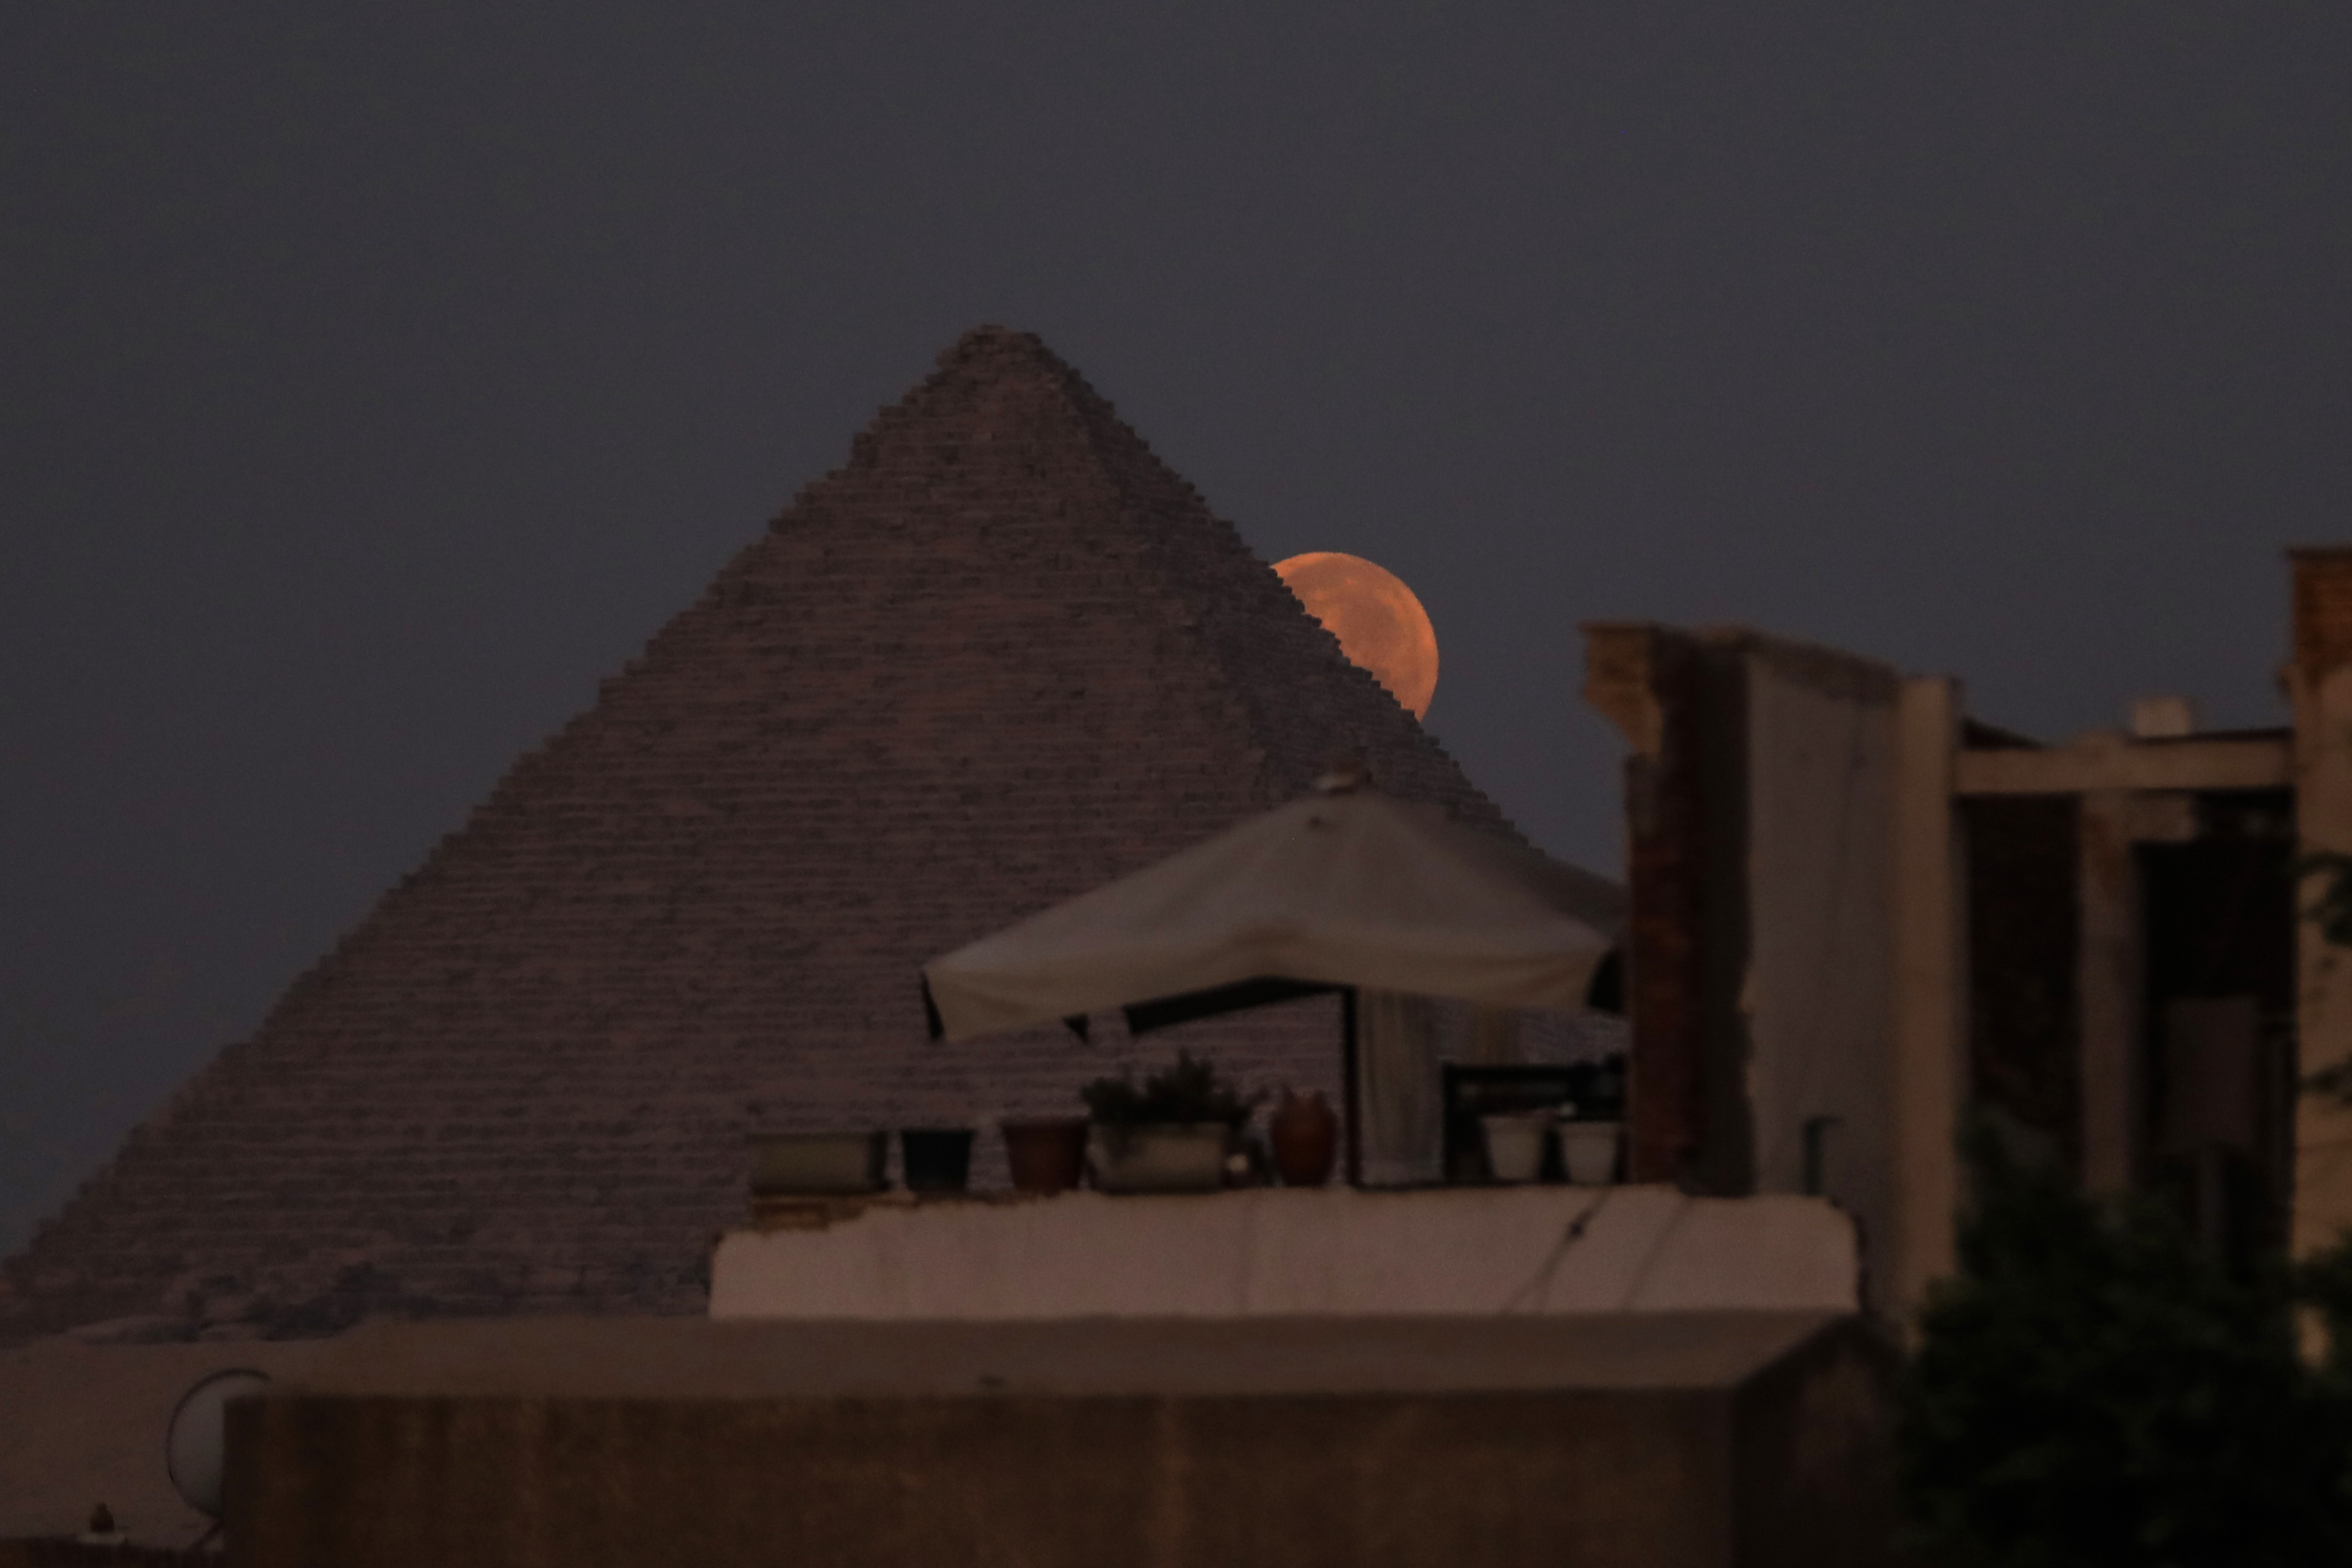 The blue supermoon is seen behind the Pyramids of Giza in Egypt